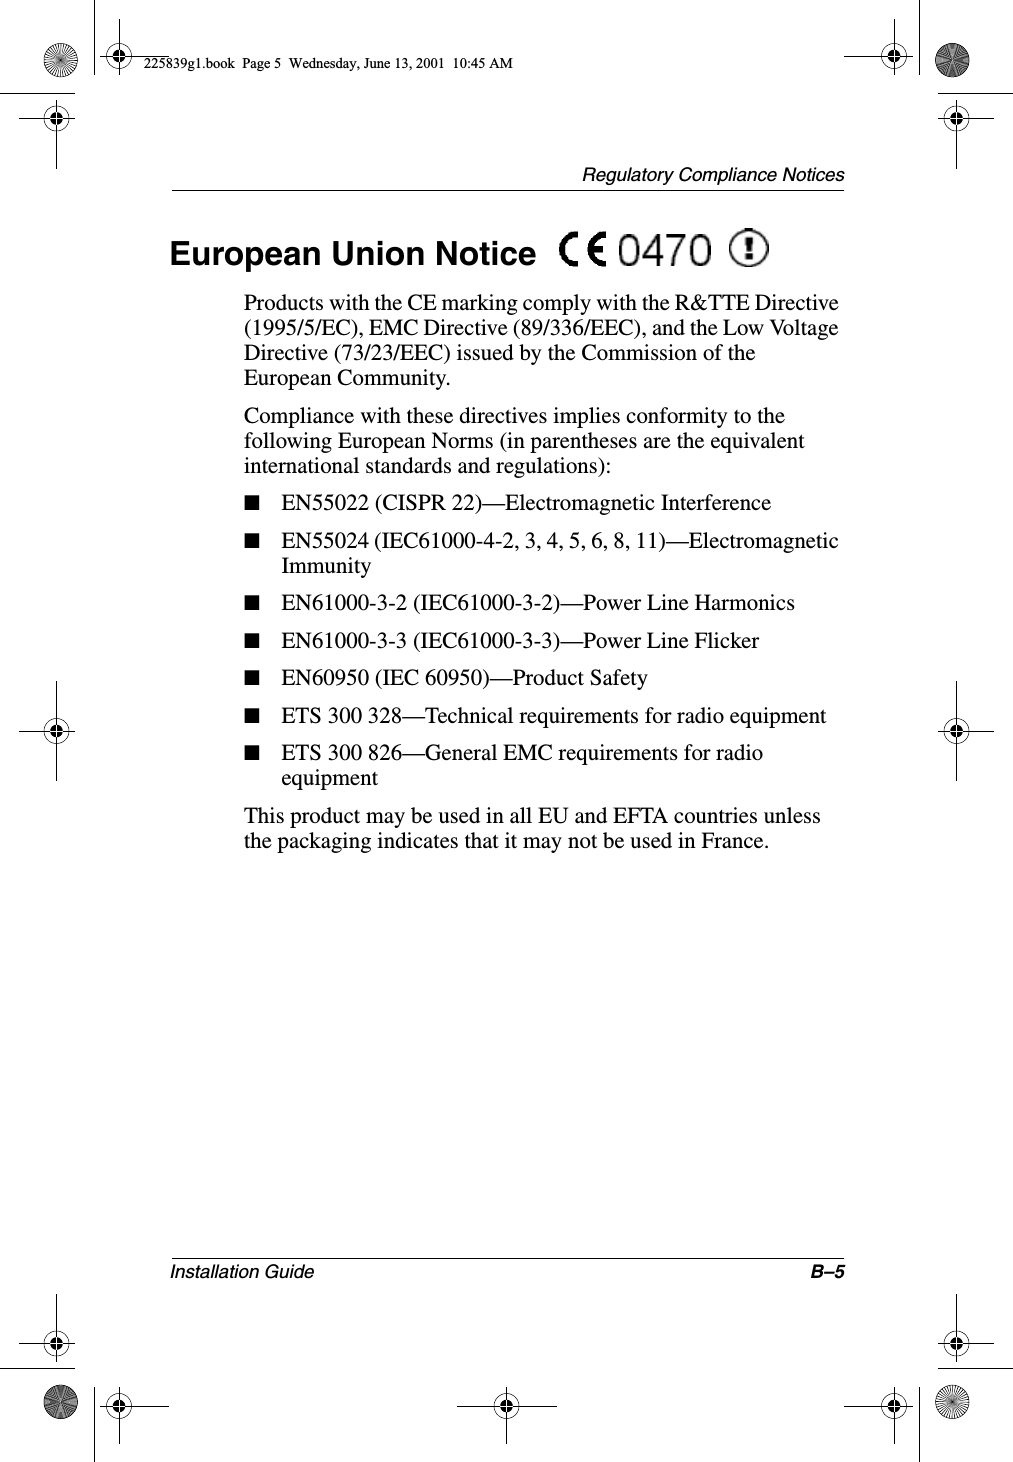 Regulatory Compliance NoticesInstallation Guide B–5European Union Notice Products with the CE marking comply with the R&amp;TTE Directive (1995/5/EC), EMC Directive (89/336/EEC), and the Low Voltage Directive (73/23/EEC) issued by the Commission of the European Community.Compliance with these directives implies conformity to the following European Norms (in parentheses are the equivalent international standards and regulations):■EN55022 (CISPR 22)—Electromagnetic Interference■EN55024 (IEC61000-4-2, 3, 4, 5, 6, 8, 11)—Electromagnetic Immunity■EN61000-3-2 (IEC61000-3-2)—Power Line Harmonics■EN61000-3-3 (IEC61000-3-3)—Power Line Flicker■EN60950 (IEC 60950)—Product Safety■ETS 300 328—Technical requirements for radio equipment■ETS 300 826—General EMC requirements for radio equipmentThis product may be used in all EU and EFTA countries unless the packaging indicates that it may not be used in France.225839g1.book  Page 5  Wednesday, June 13, 2001  10:45 AM